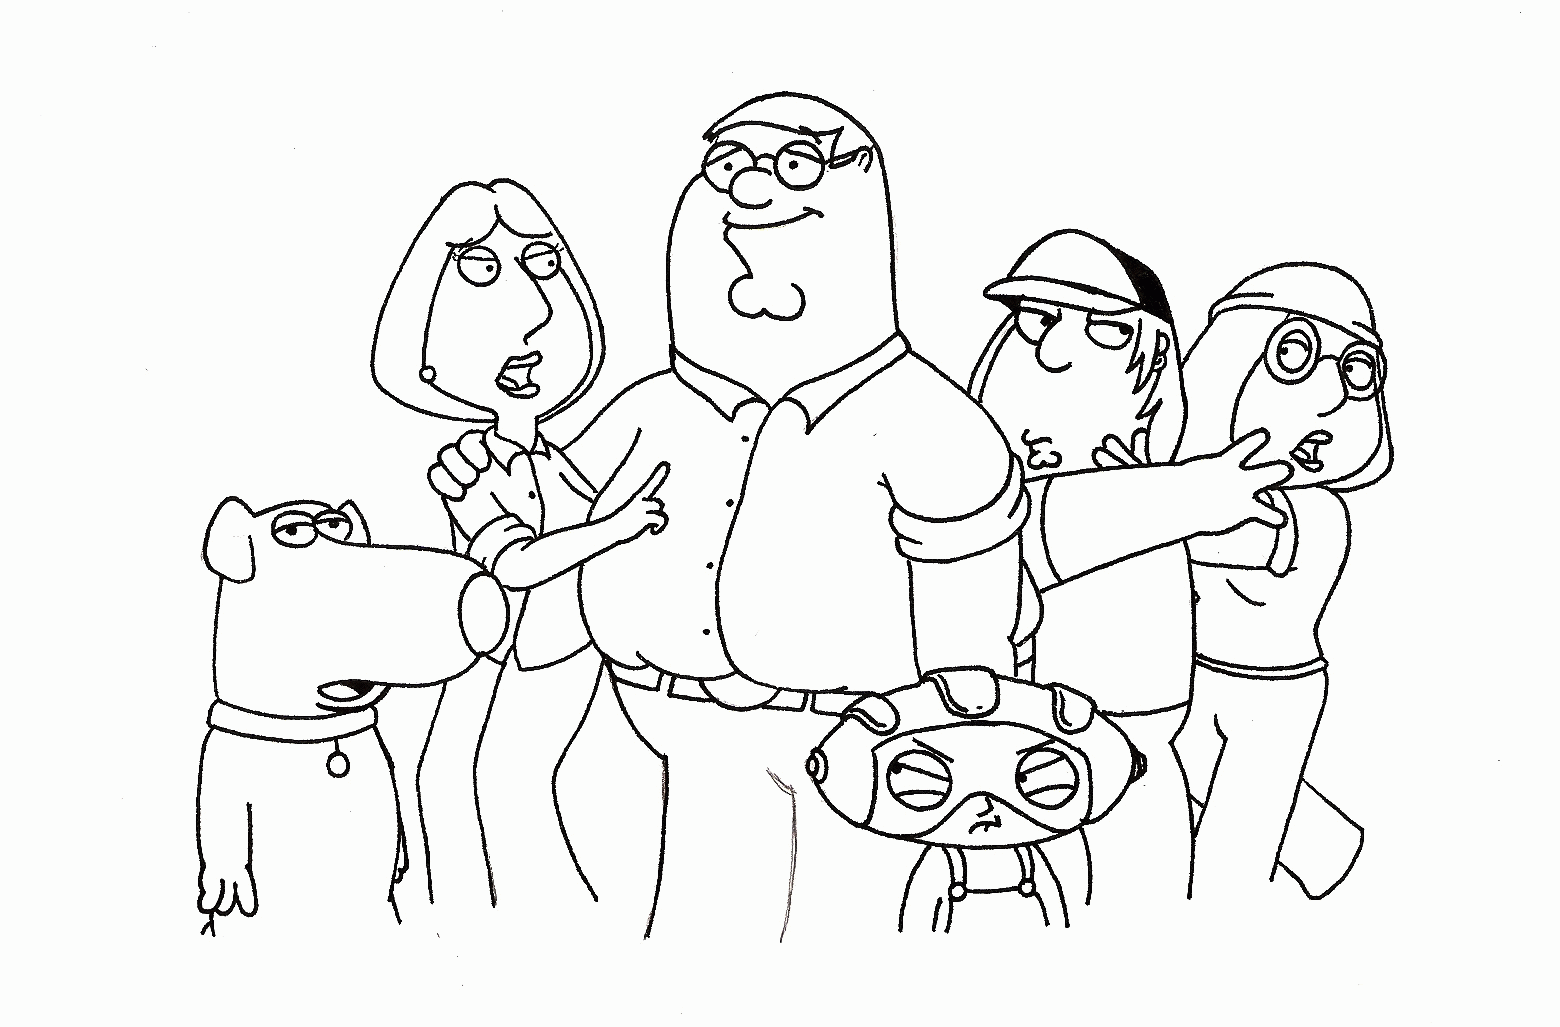 Family Guy Coloring - Coloring Pages for Kids and for Adults